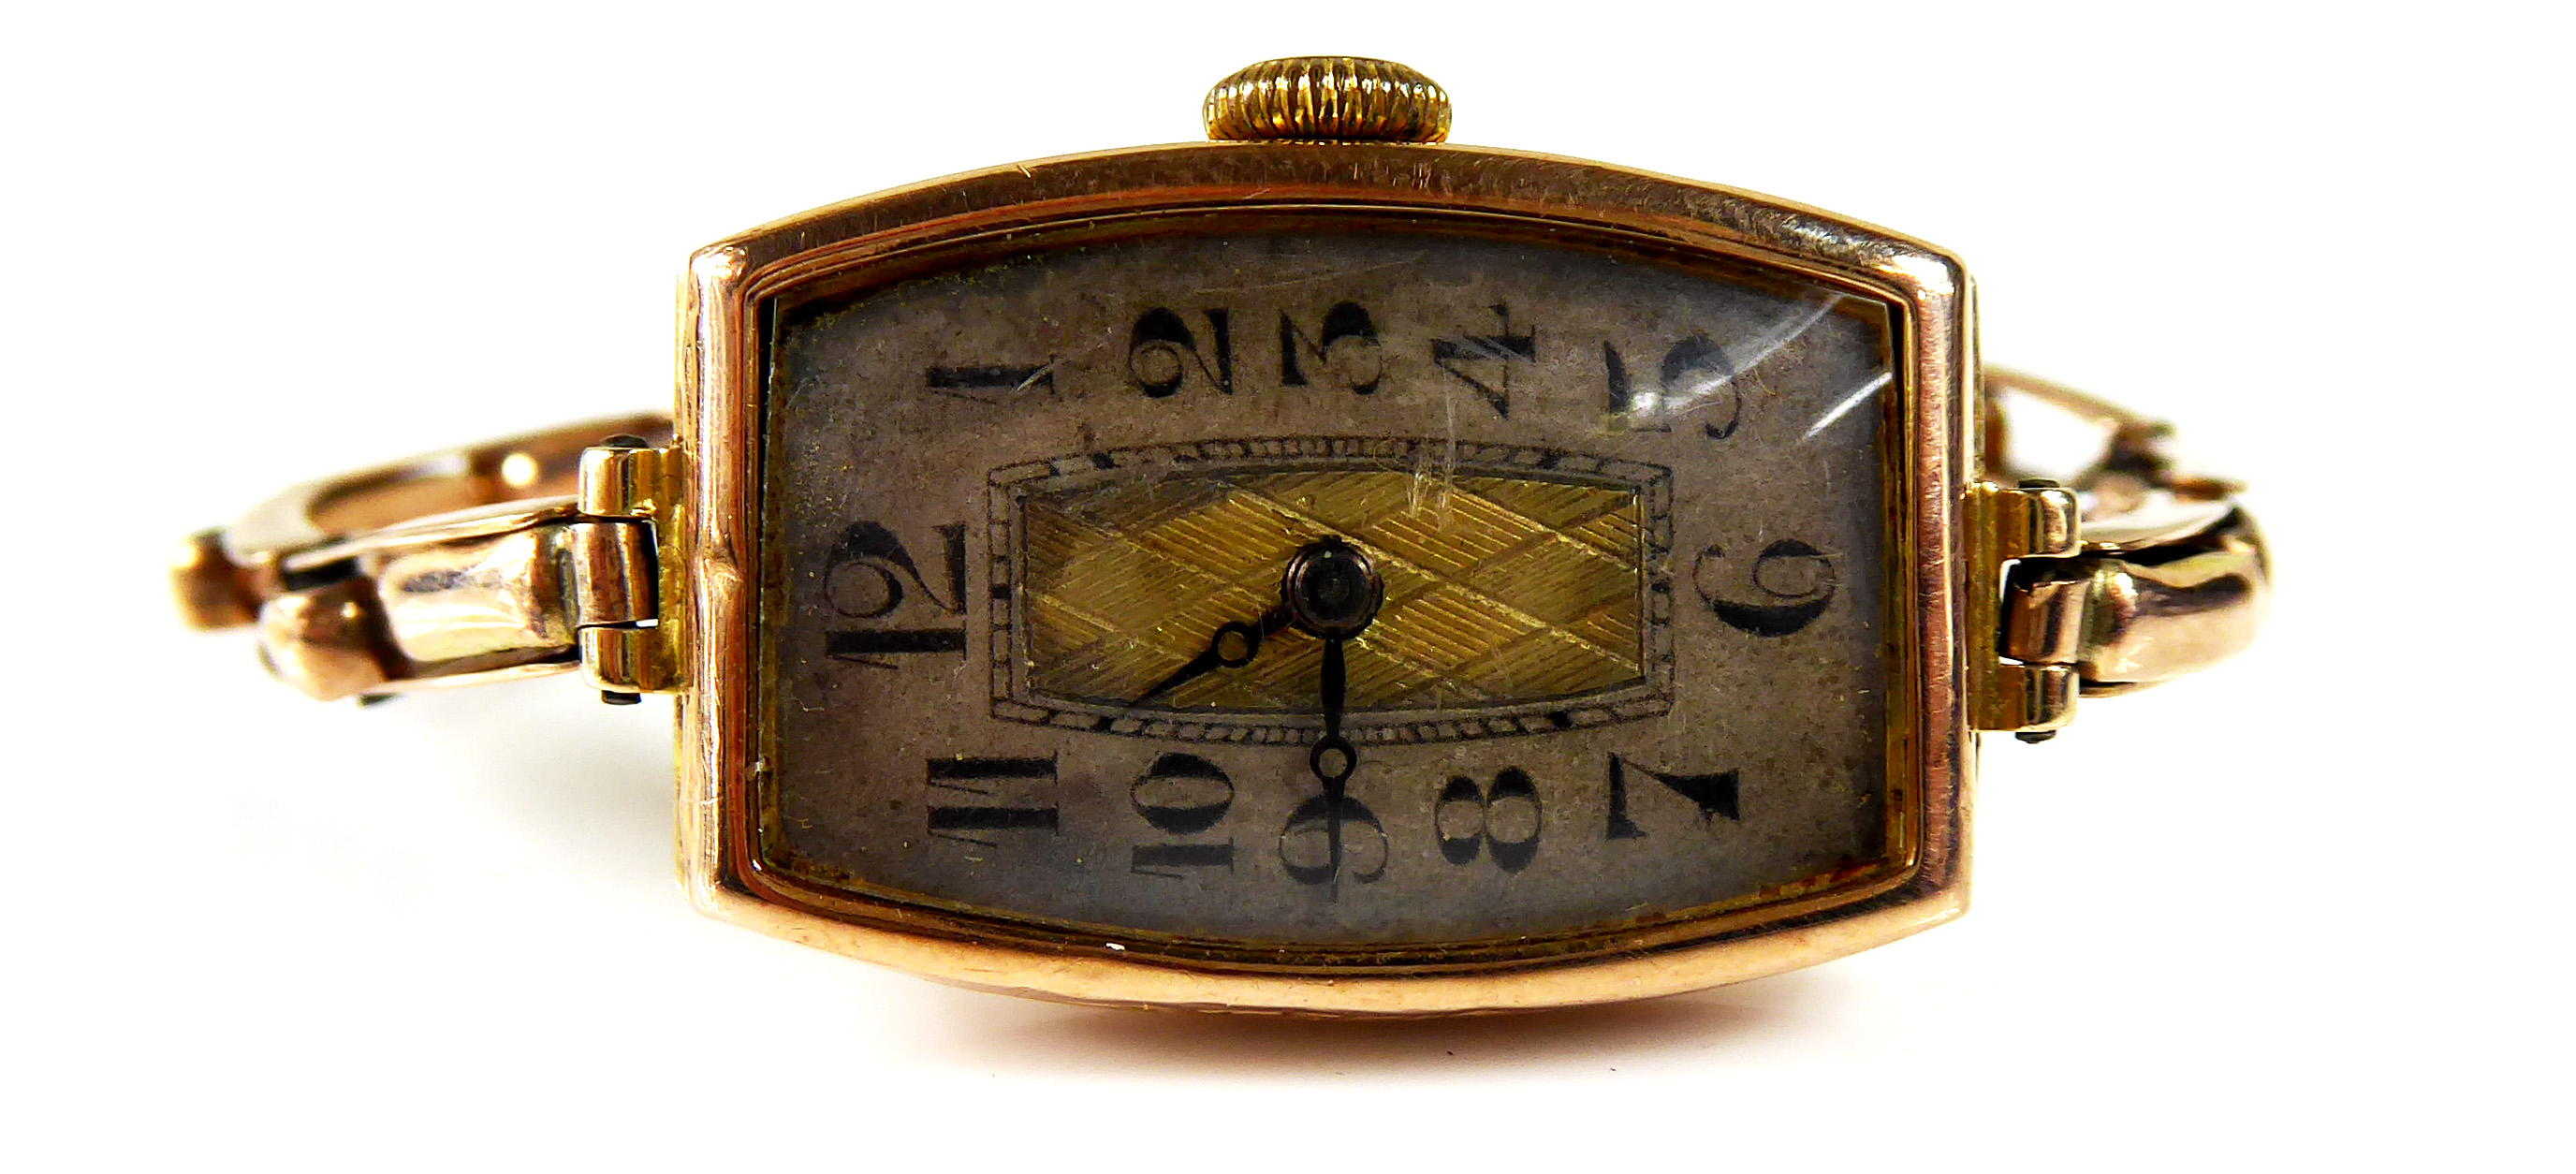 AN EARLY 20TH CENTURY 9CT GOLD LADIES' WRISTWATCH Geometric dial with Arabic numerals and expandable